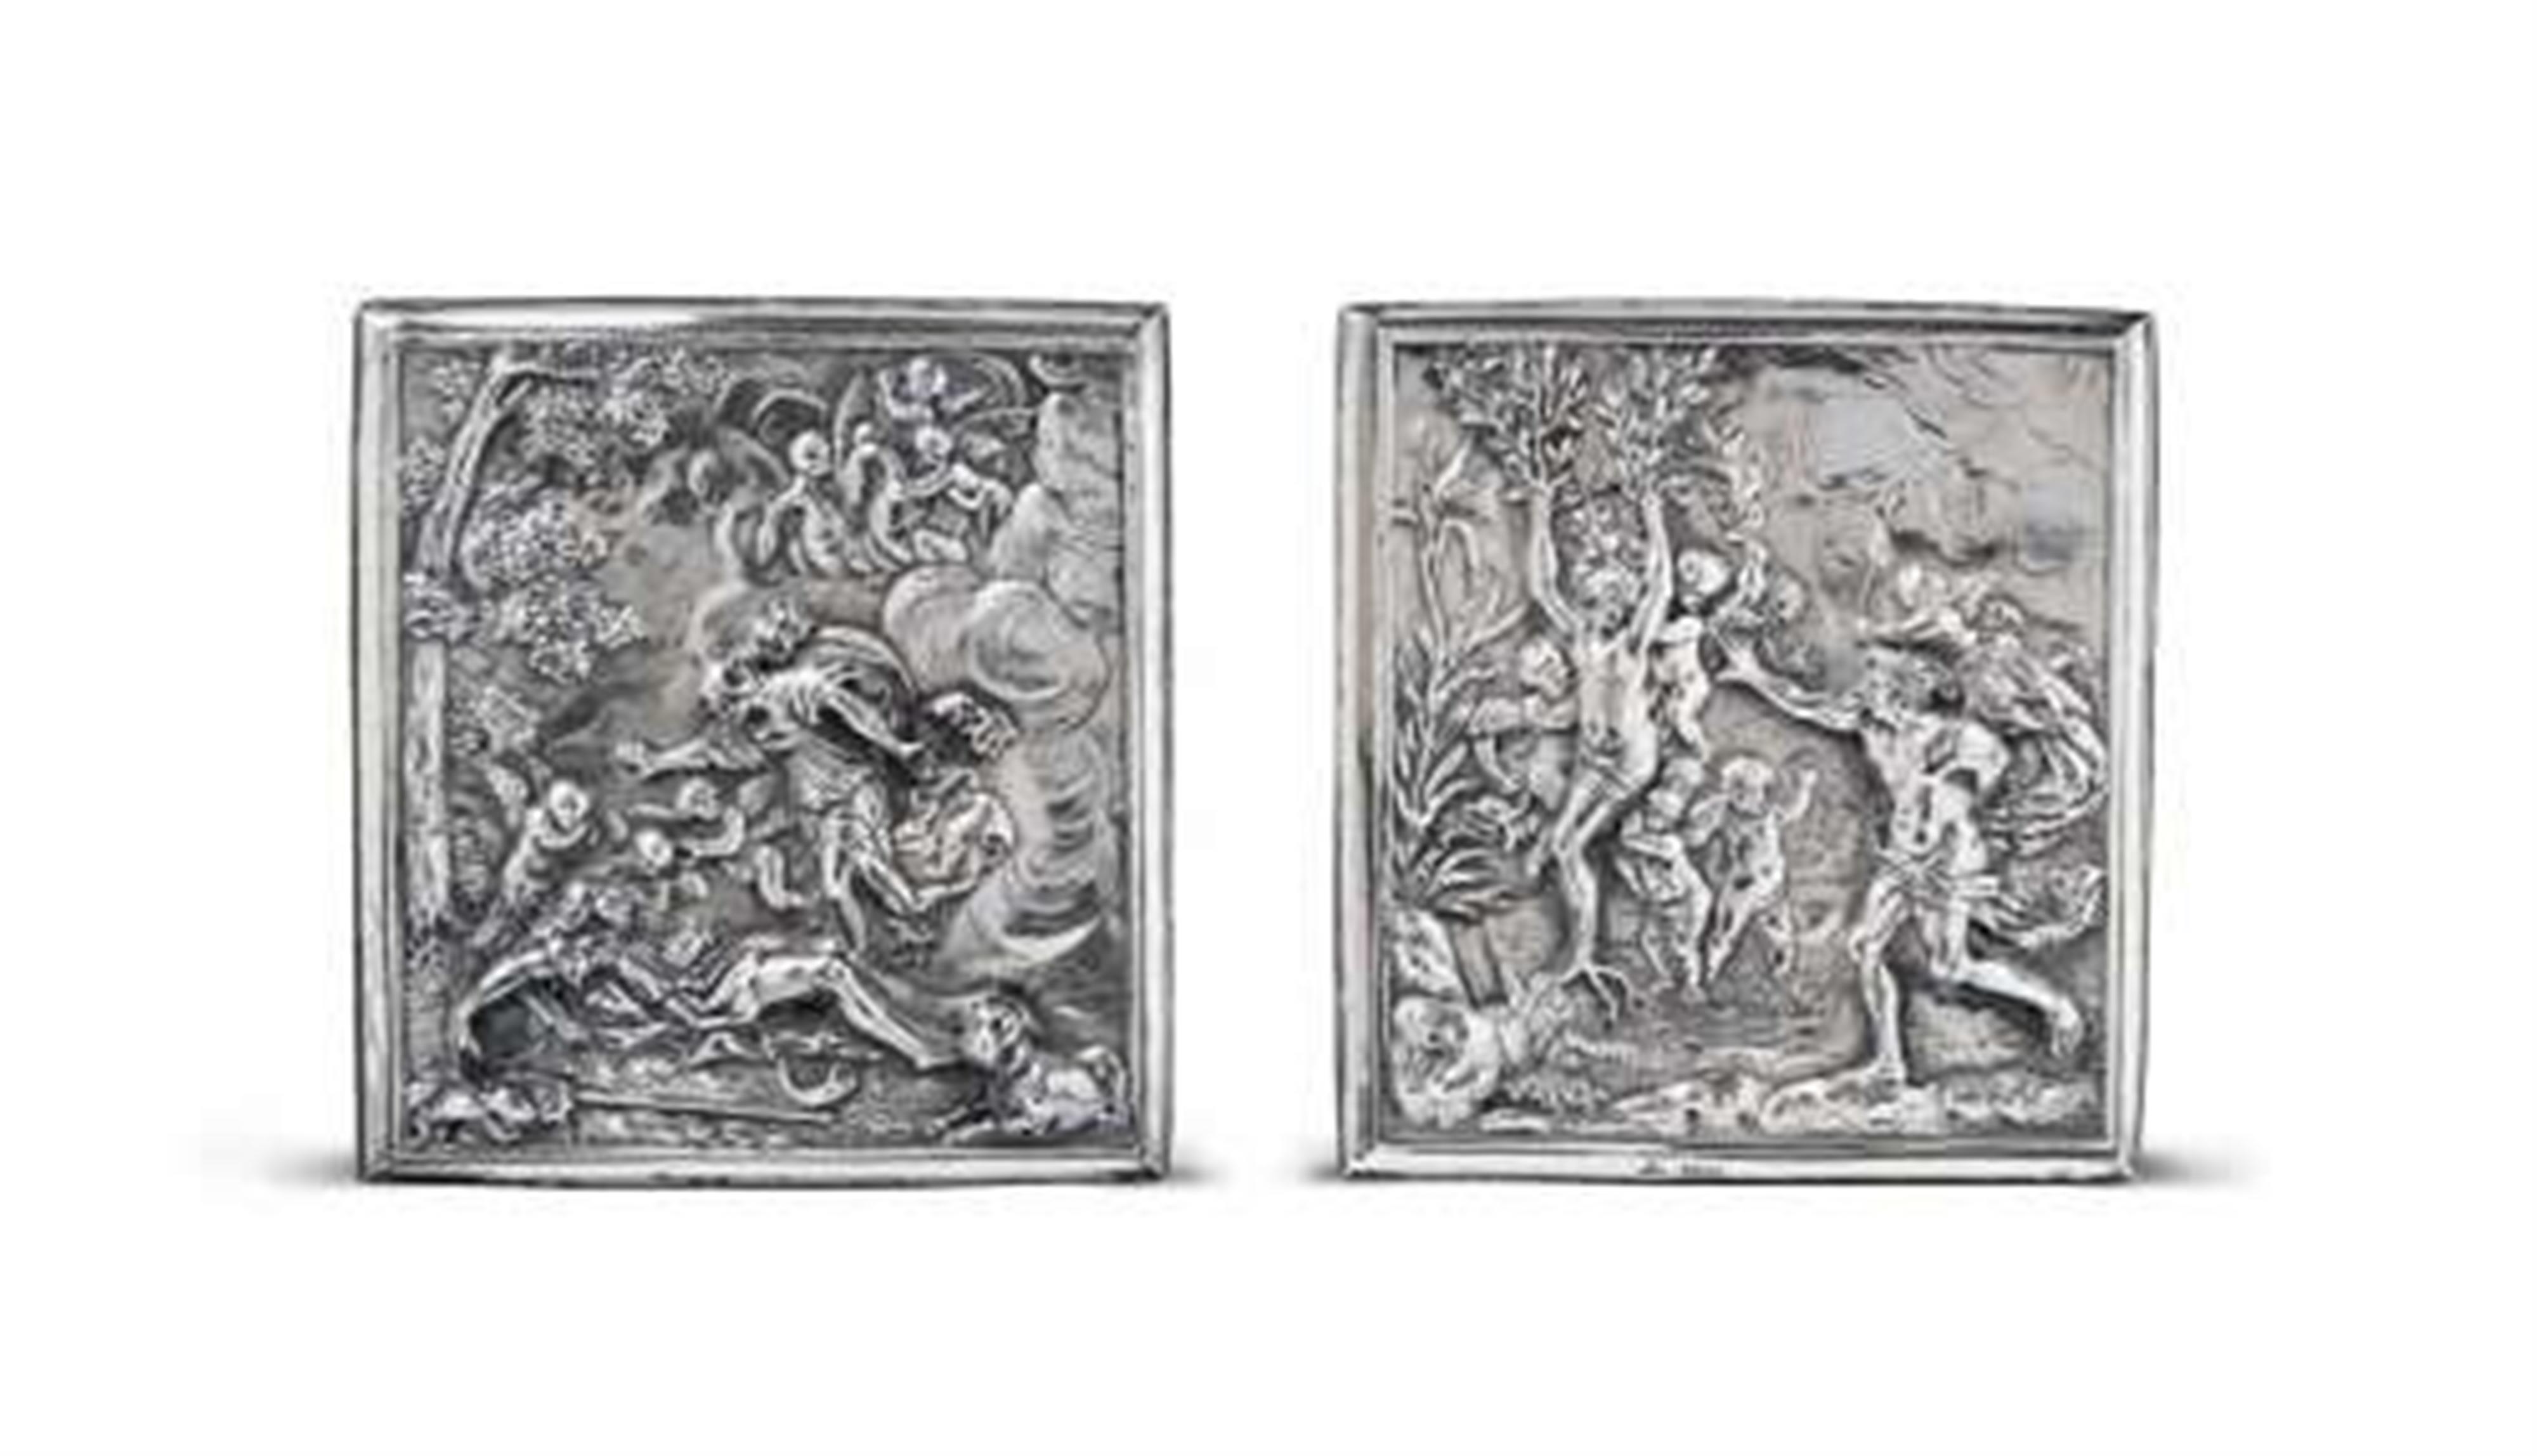 Two Augsburg silver reliefs with remains of gilt. Showing scenes of Venus mourning Adonis and Apollo with Daphne. Apollo's arm lost. Presented in later London silver frames marked John Samuel Hunt, 1853/54. Mounted together on a velvet-covered, gilt frame - image-3